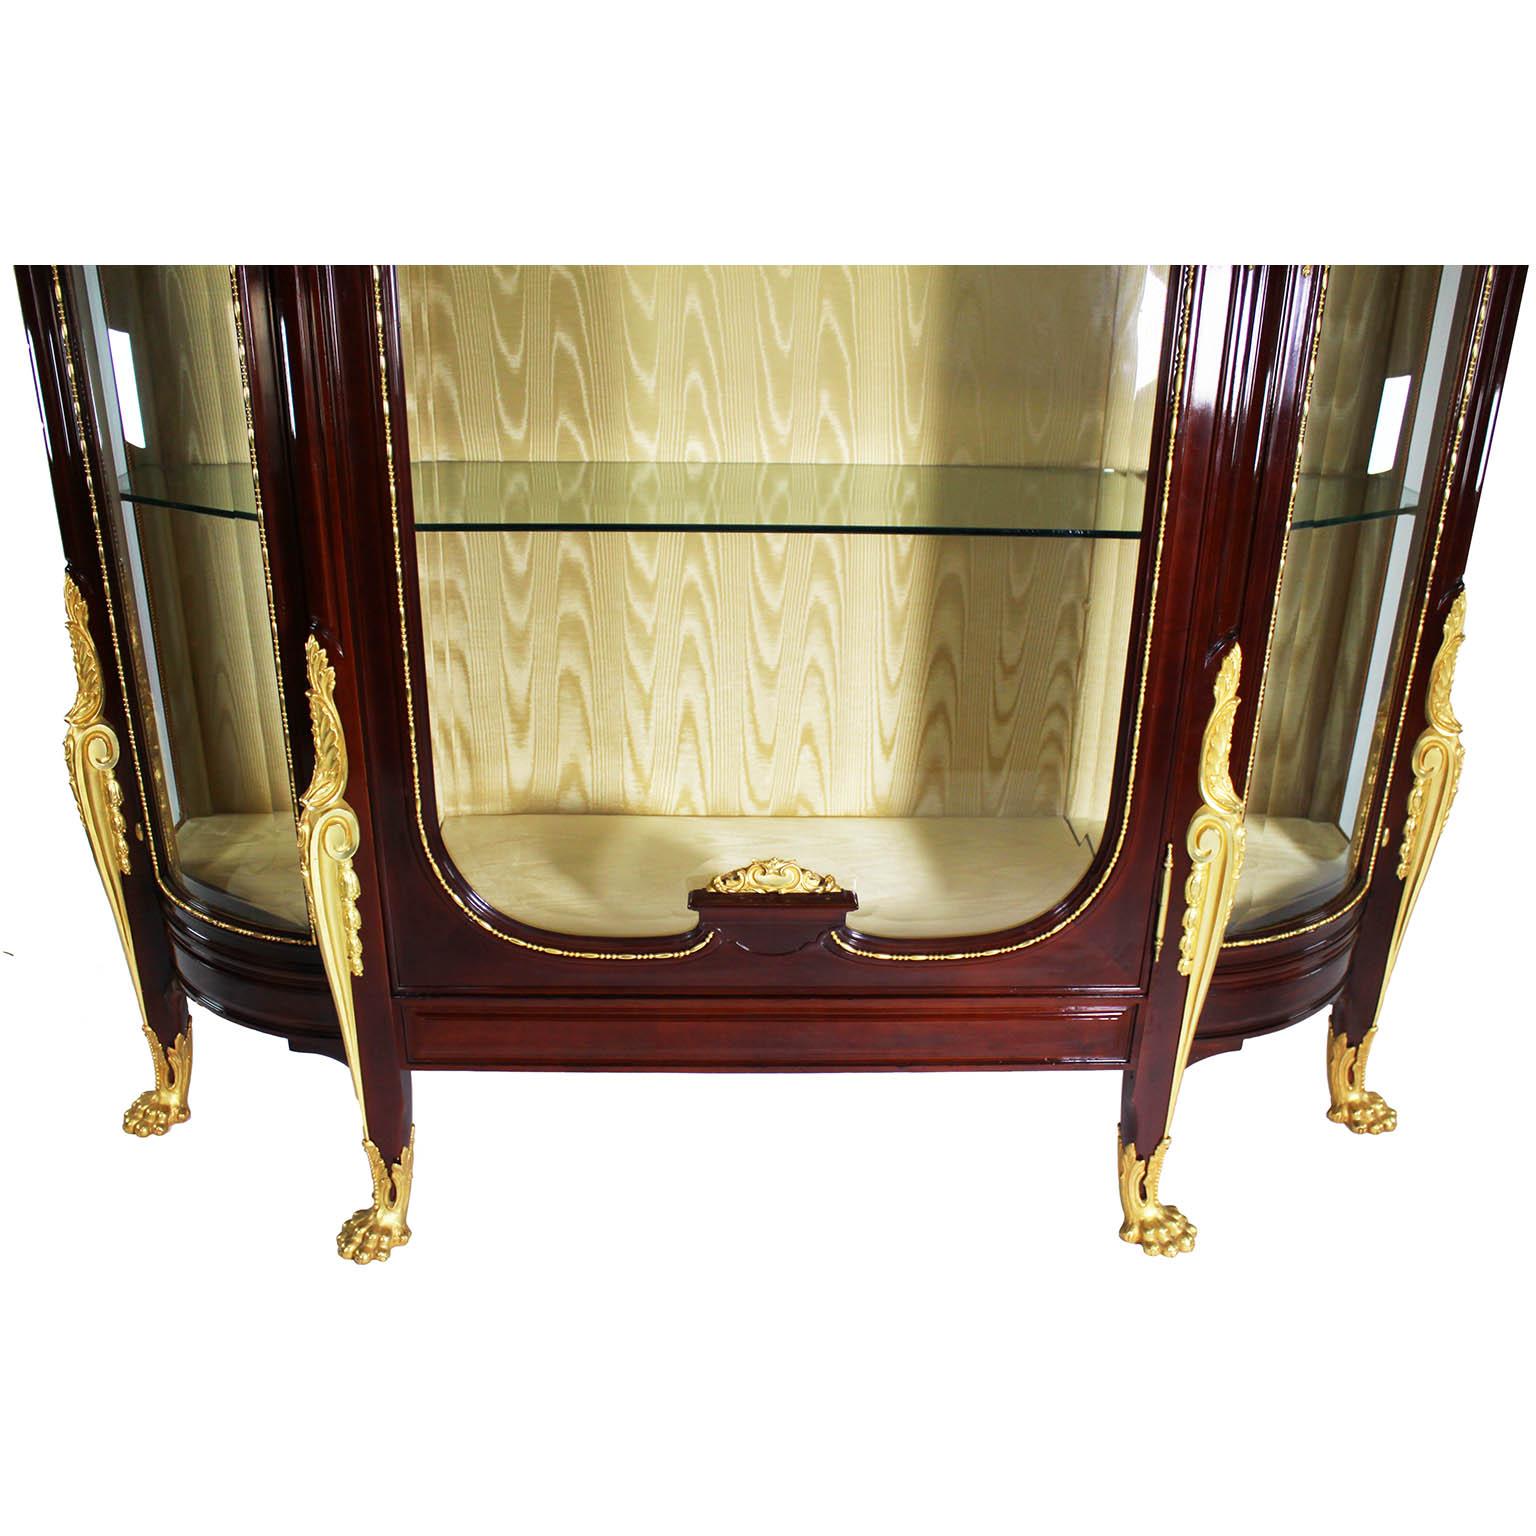 A Fine and Large French 19th/20th Century Louis XV Style Mahogany and Gilt-Bronze Mounted Three-Corps Vitrine Cabinet. The converted three door display case with twin bombé (rounded) side beveled glass doors and a central beveled glass door, all